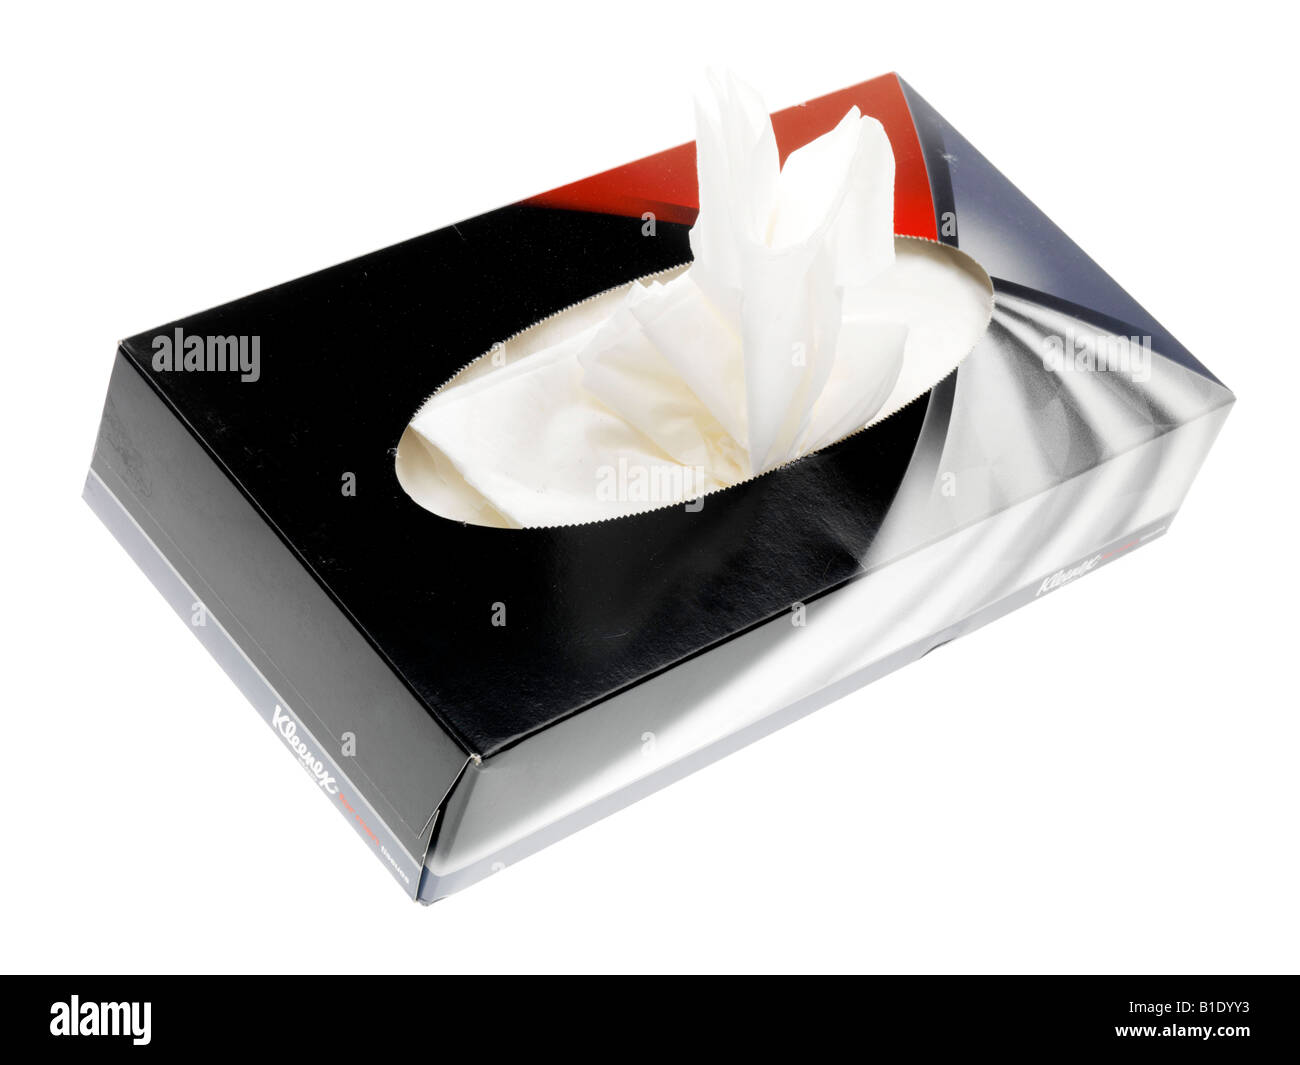 Page 3 - Kleenex Box High Resolution Stock Photography and Images - Alamy